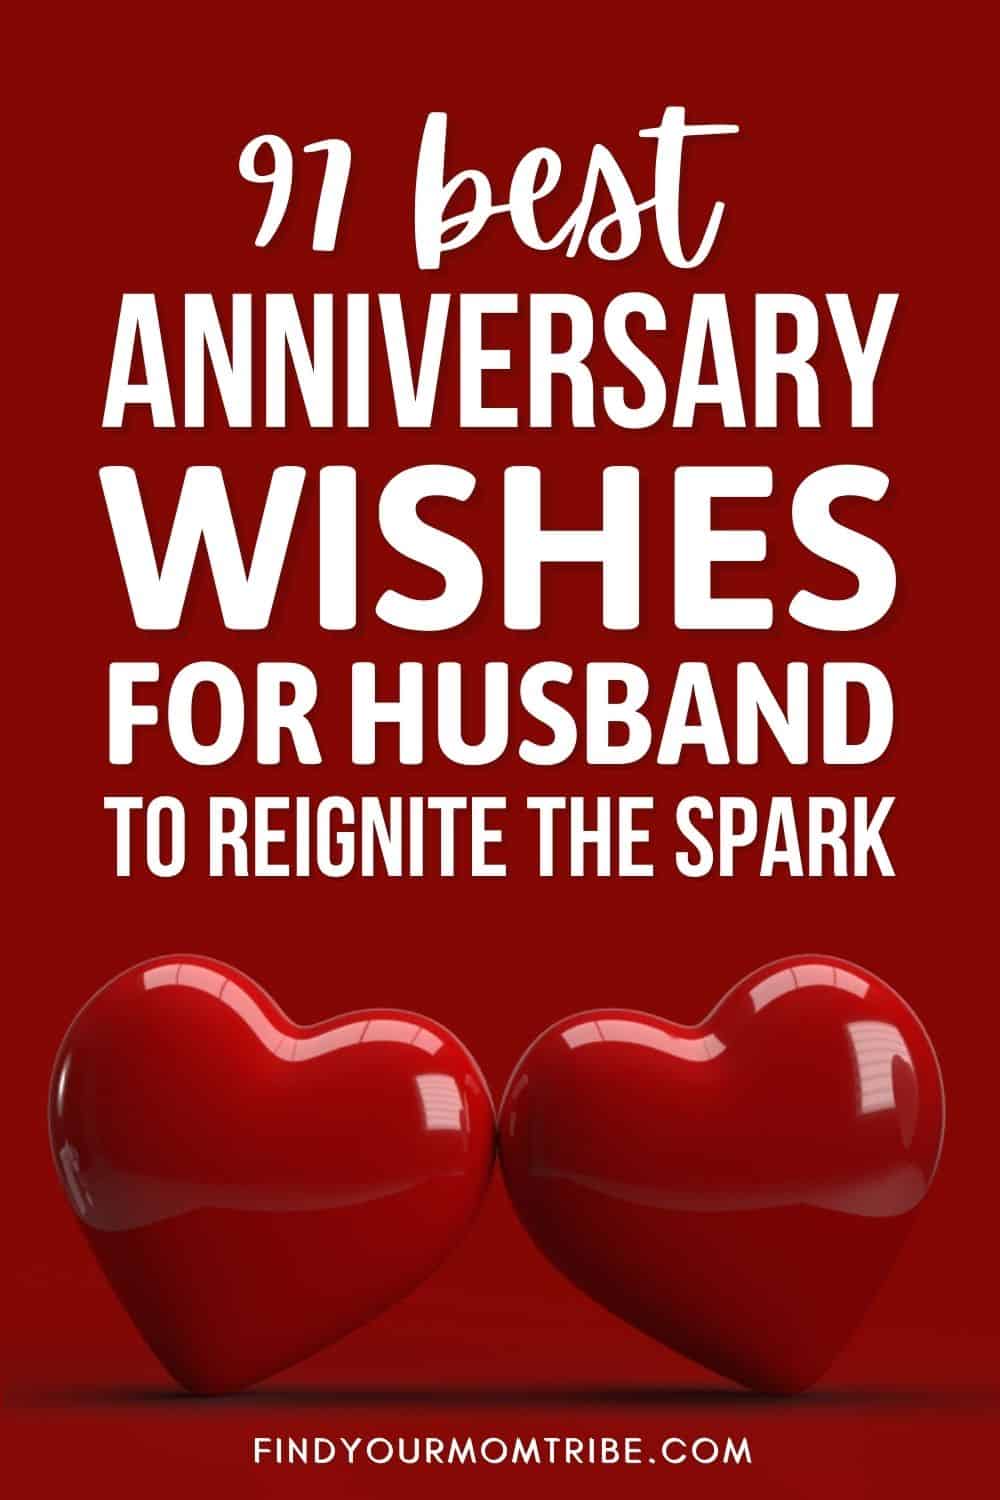 Best Anniversary Wishes For Husband To Reignite The Spark Pinterest